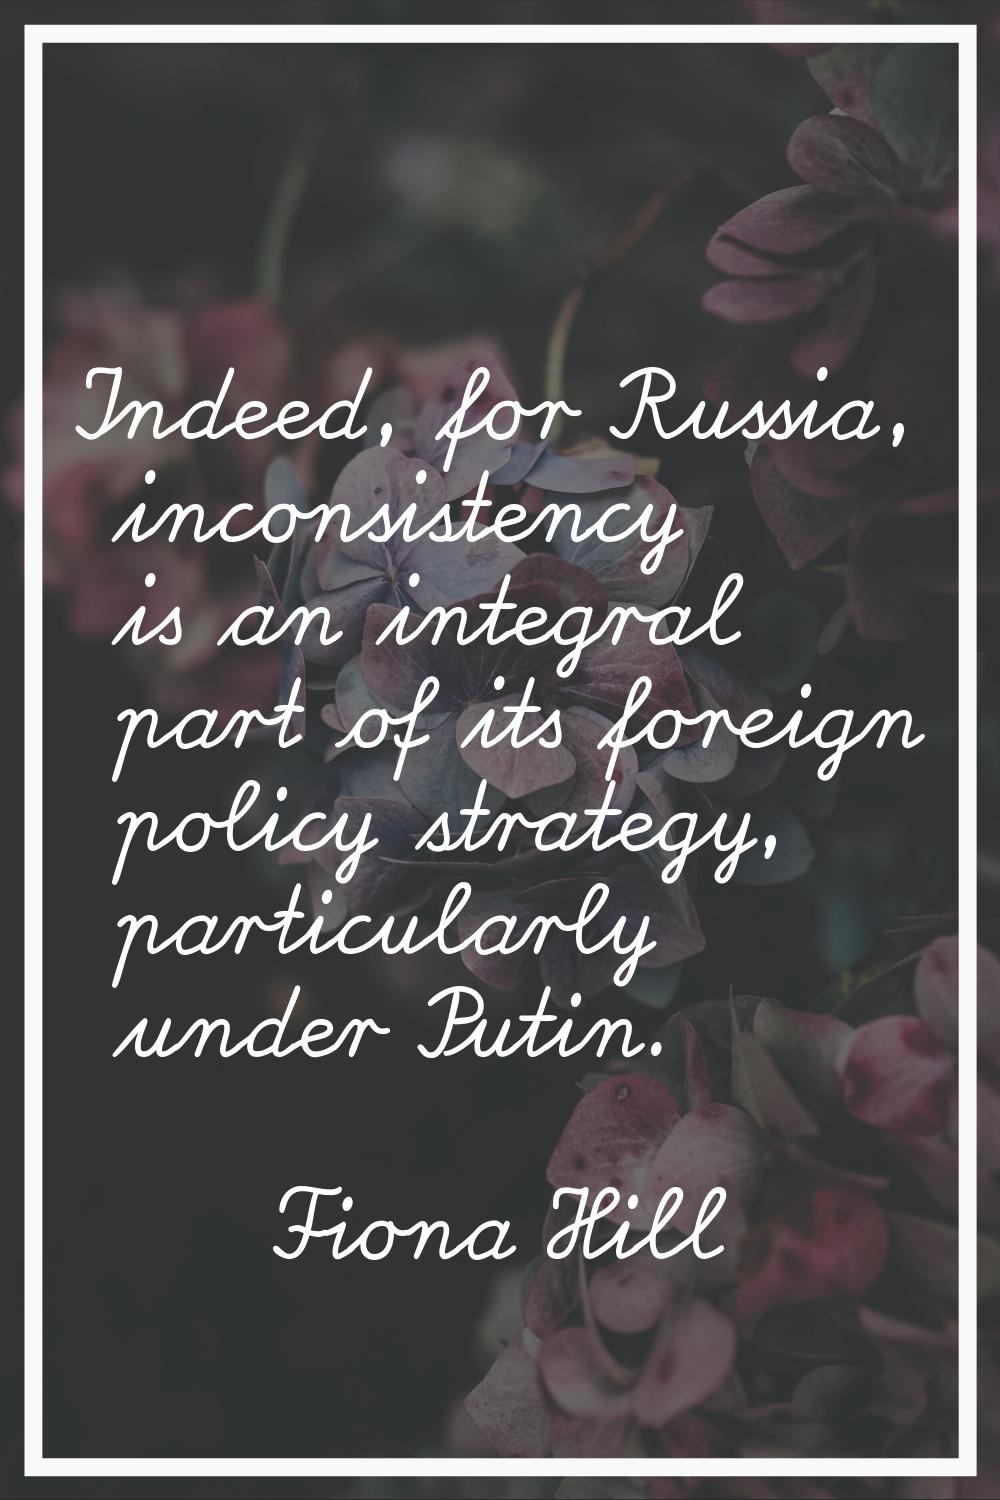 Indeed, for Russia, inconsistency is an integral part of its foreign policy strategy, particularly 